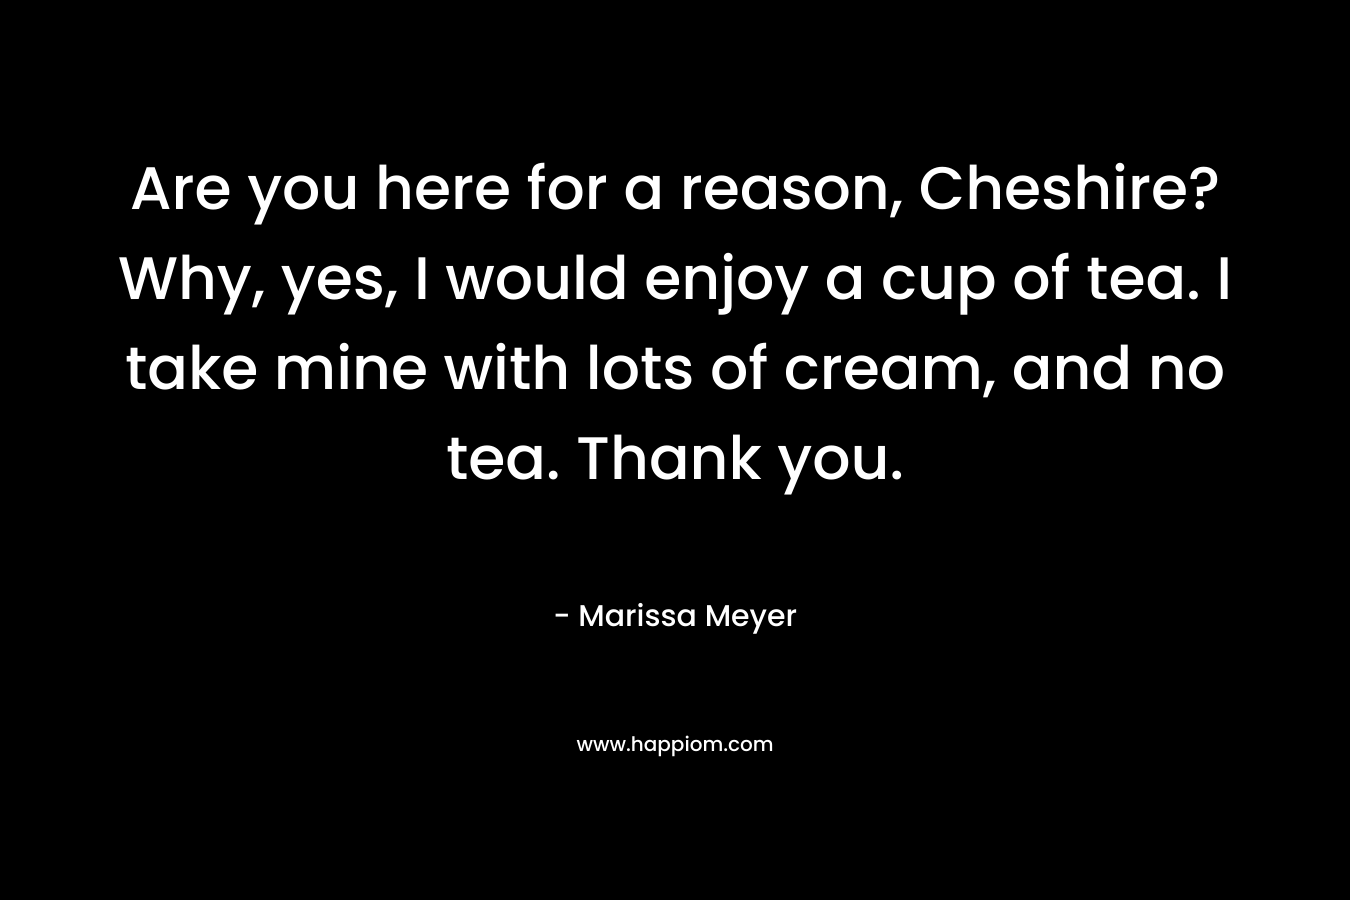 Are you here for a reason, Cheshire?Why, yes, I would enjoy a cup of tea. I take mine with lots of cream, and no tea. Thank you.